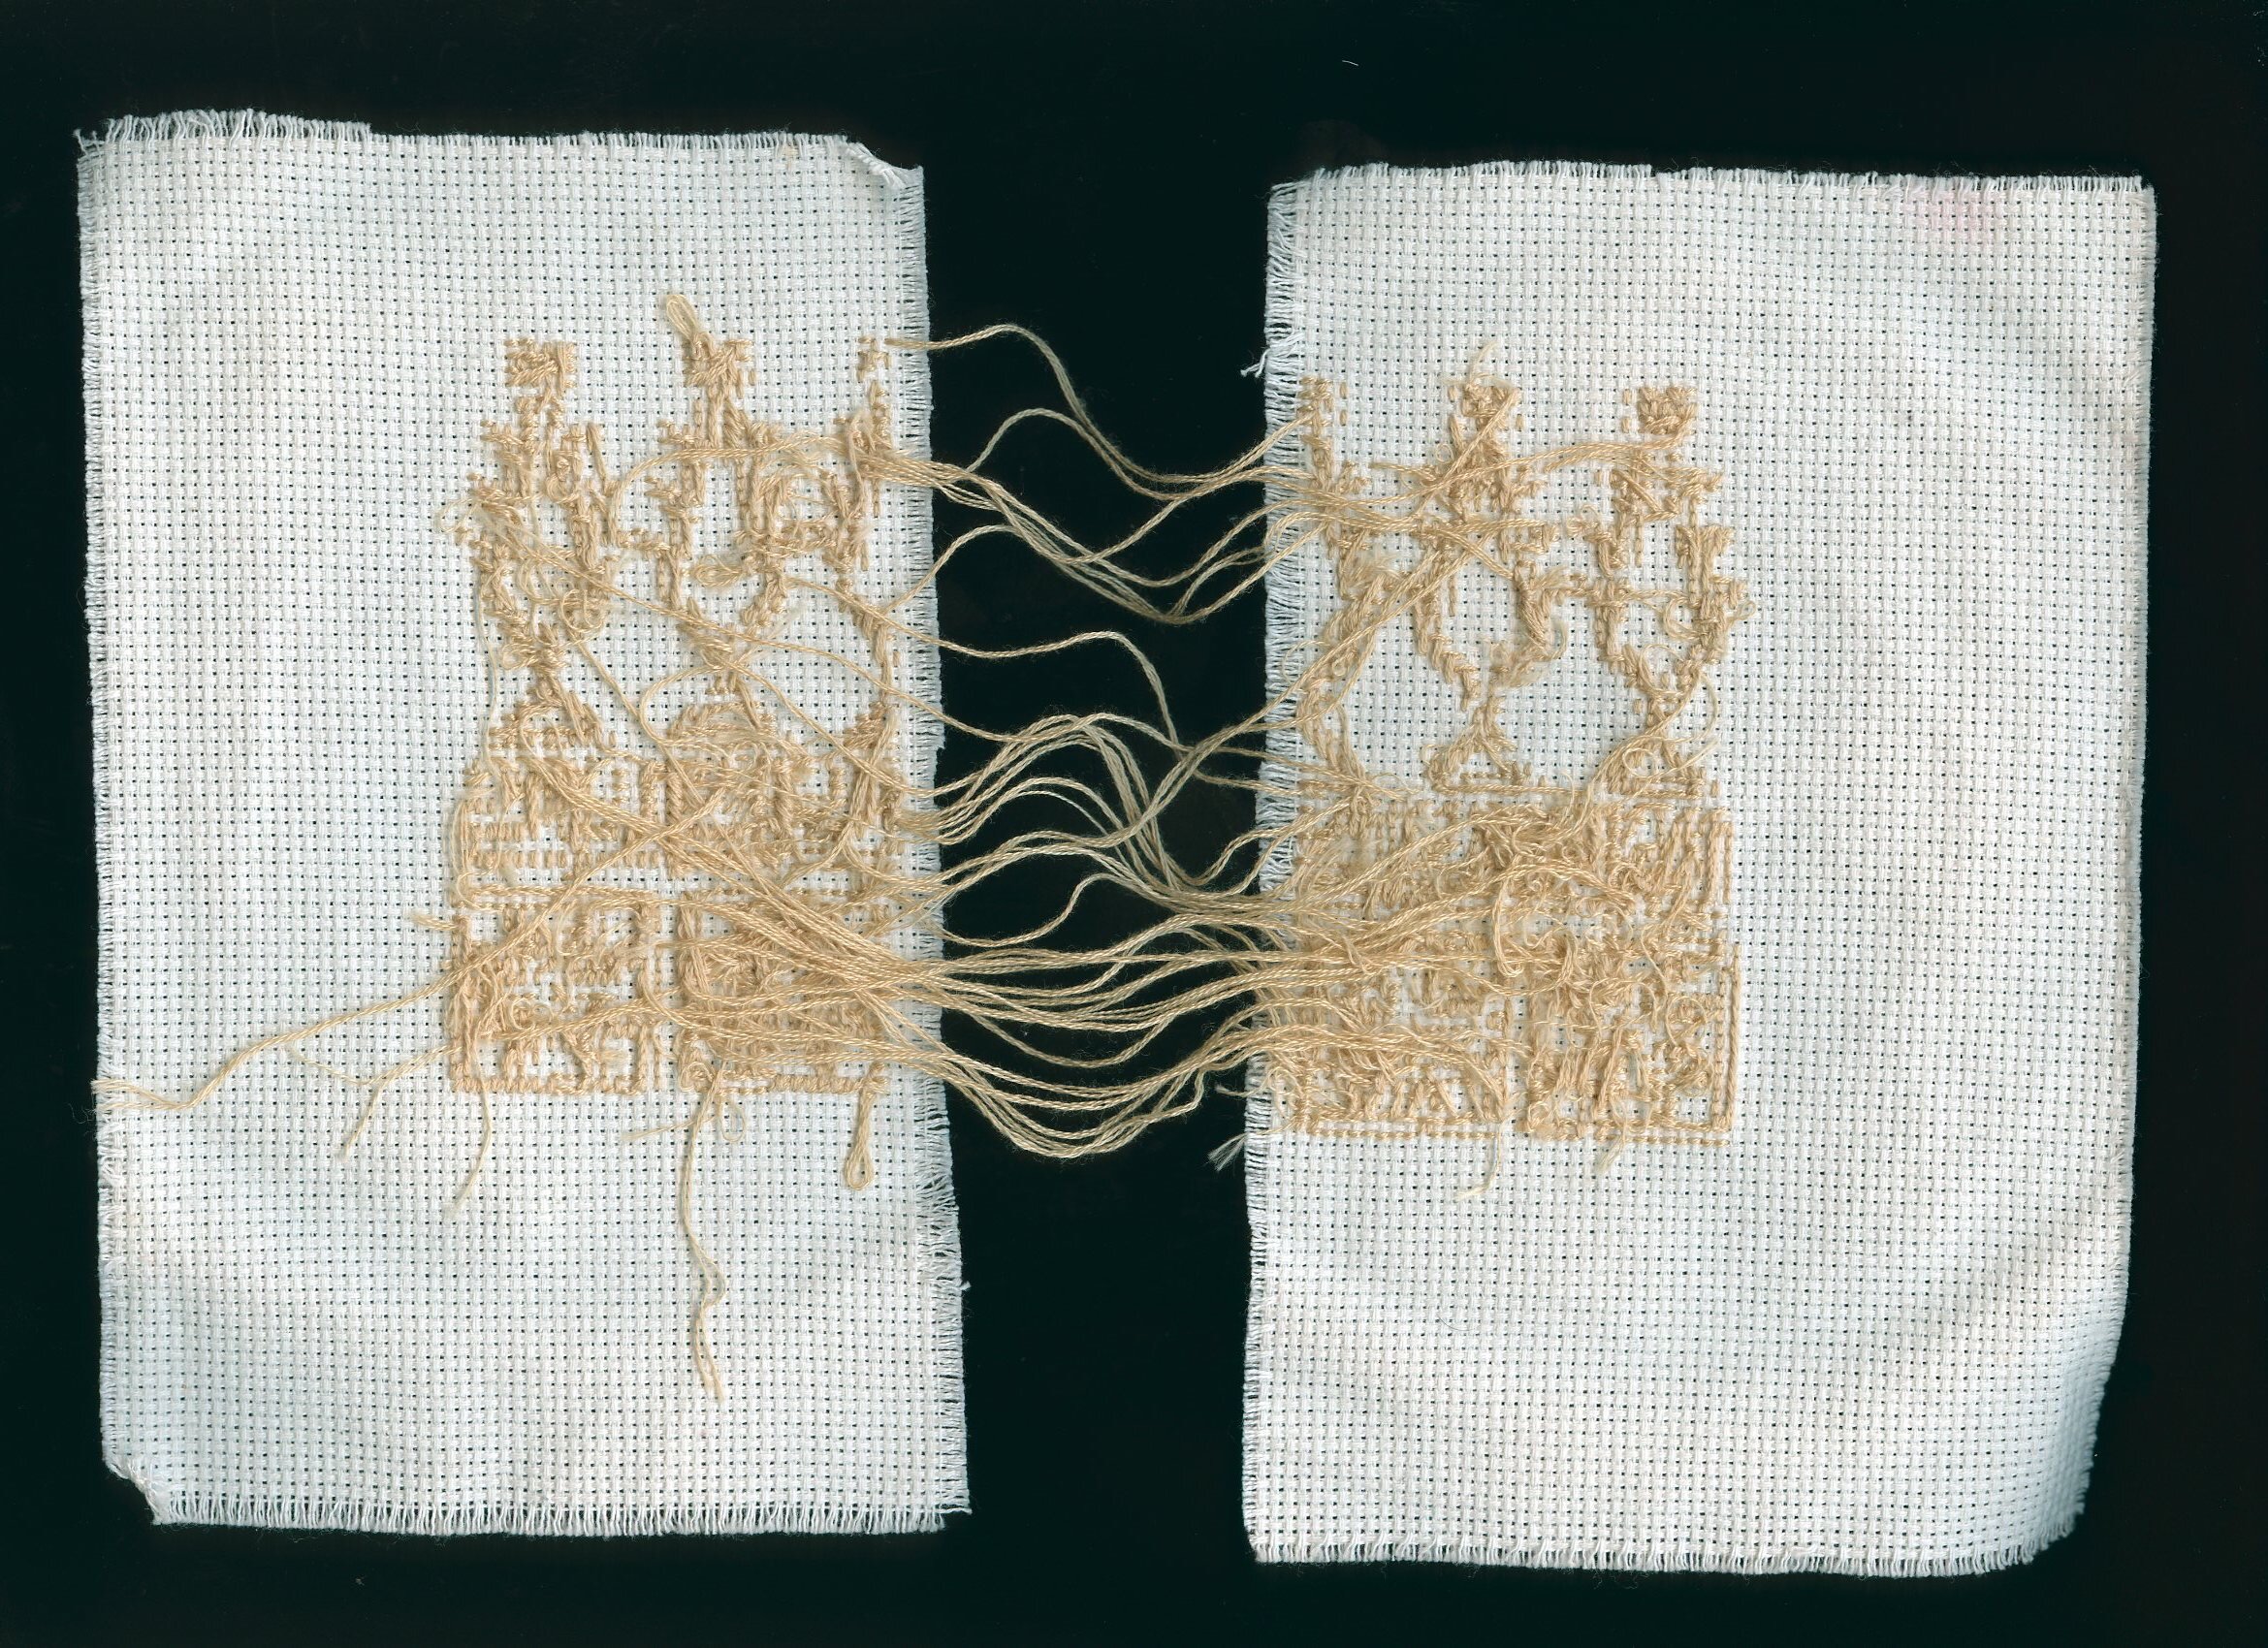  Amna Attia,  Resilience Through Reconnection,  hand embroidered cloth 